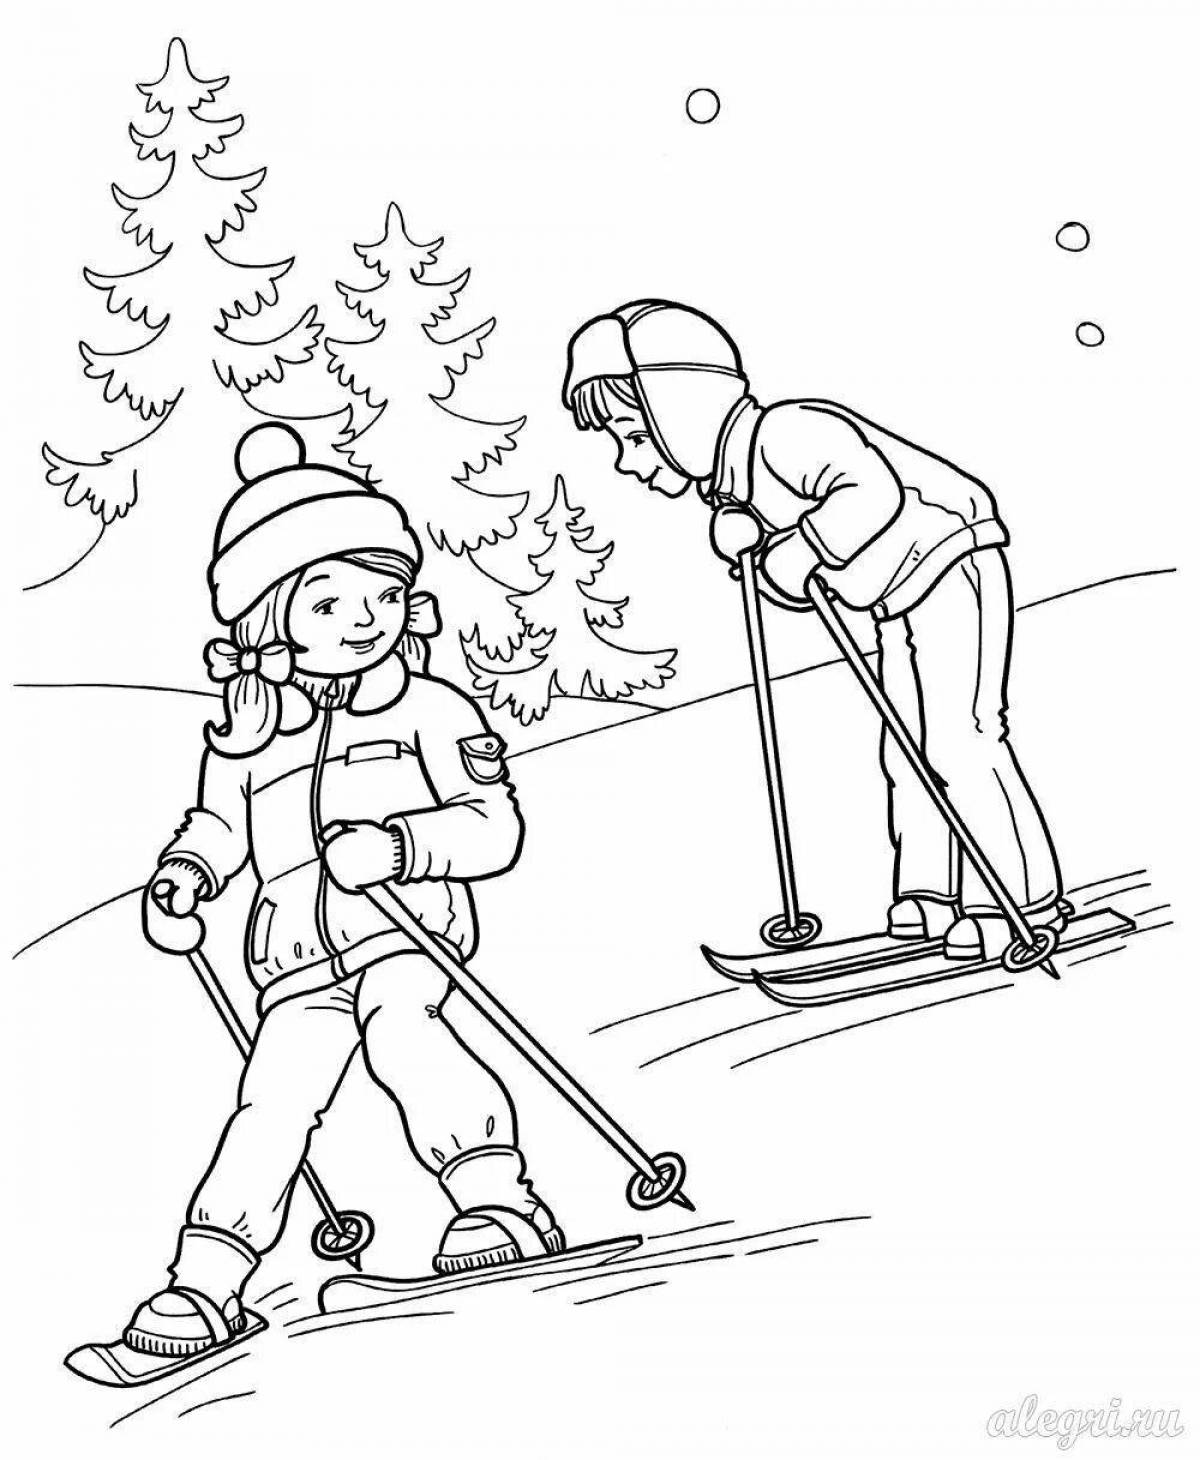 Outstanding winter sports coloring page for kids